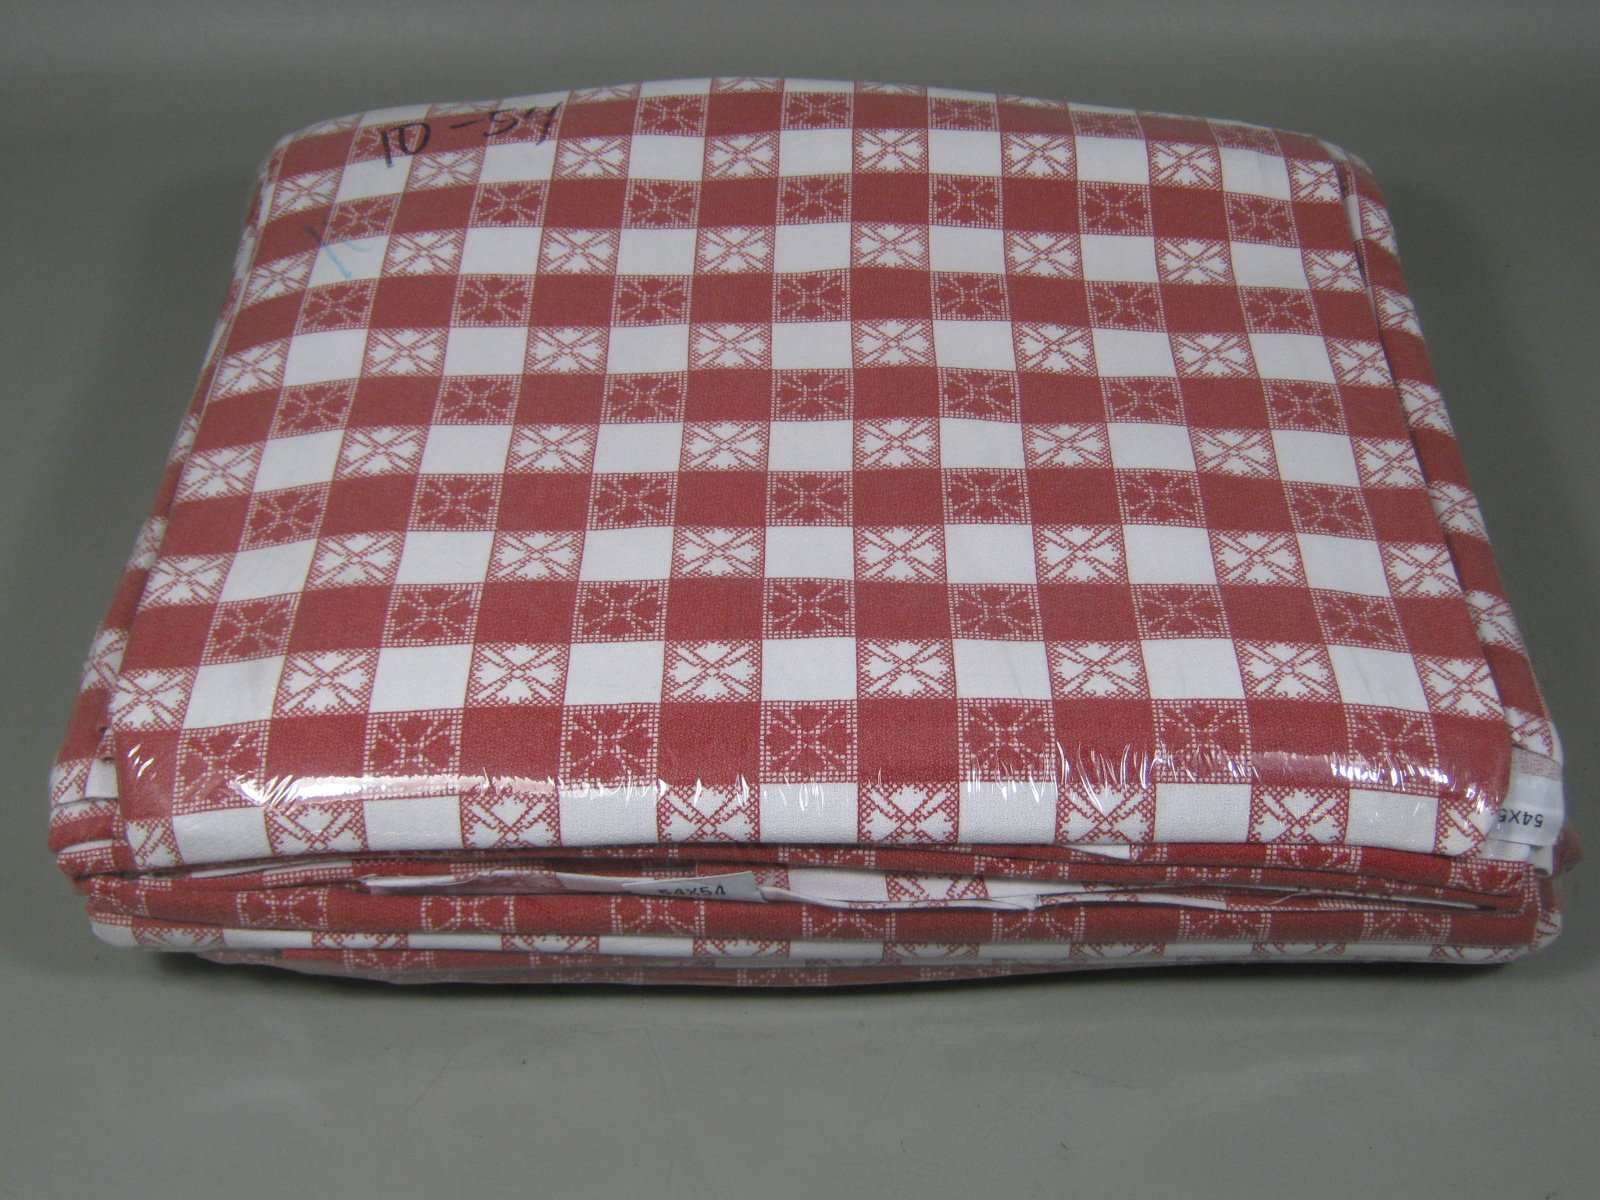 10 Square 54" Tablecloths Red White Checkered Linens Picnic Catering Restaurant